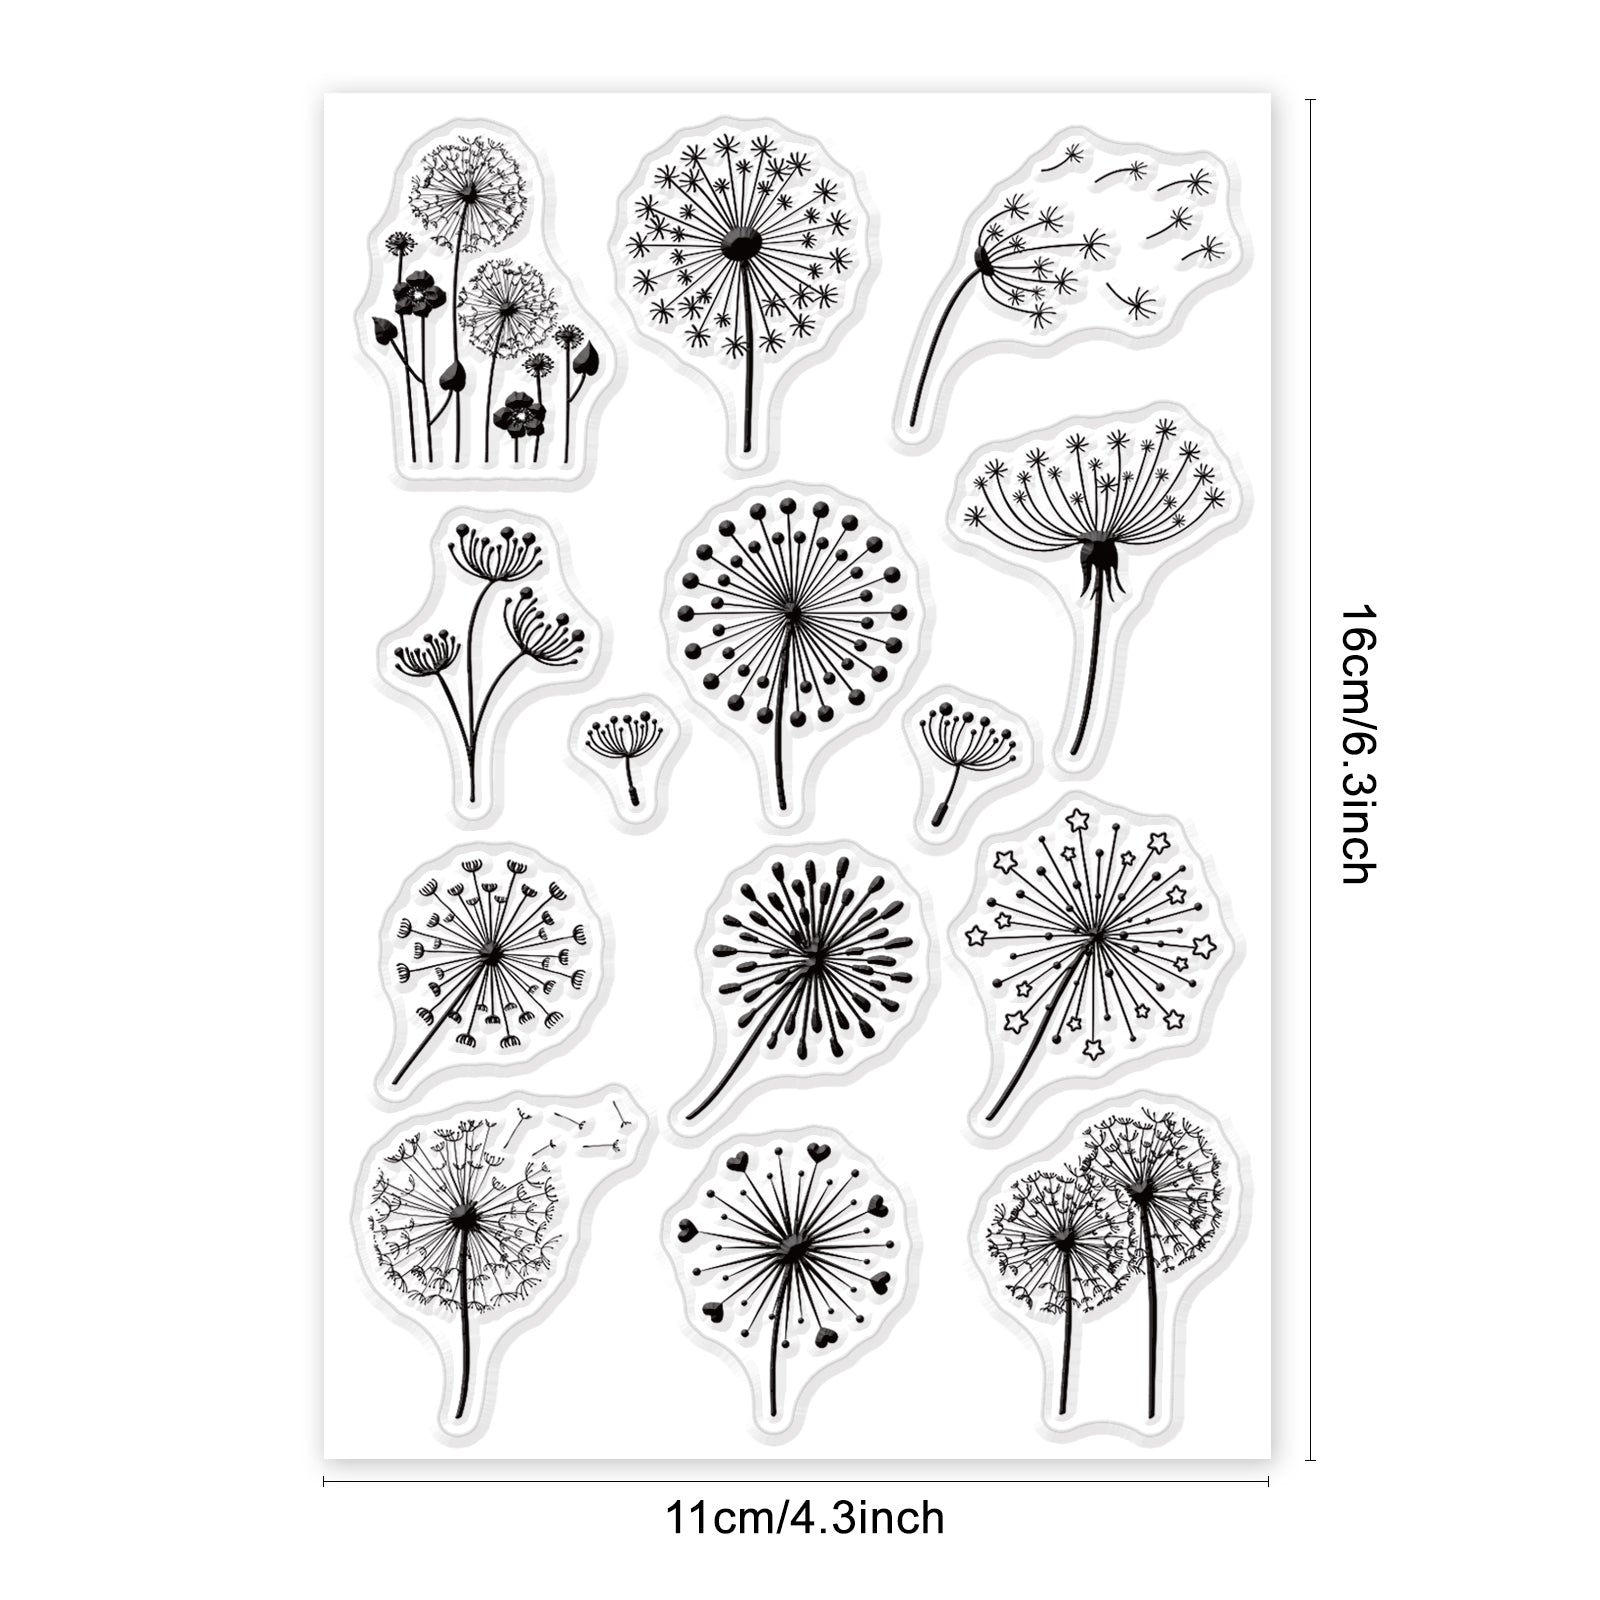 Globleland Dandelion, Plant, Different Types Dandelion, Beautiful Dandelion Flowers Leaves Clear Silicone Stamp Seal for Card Making Decoration and DIY Scrapbooking